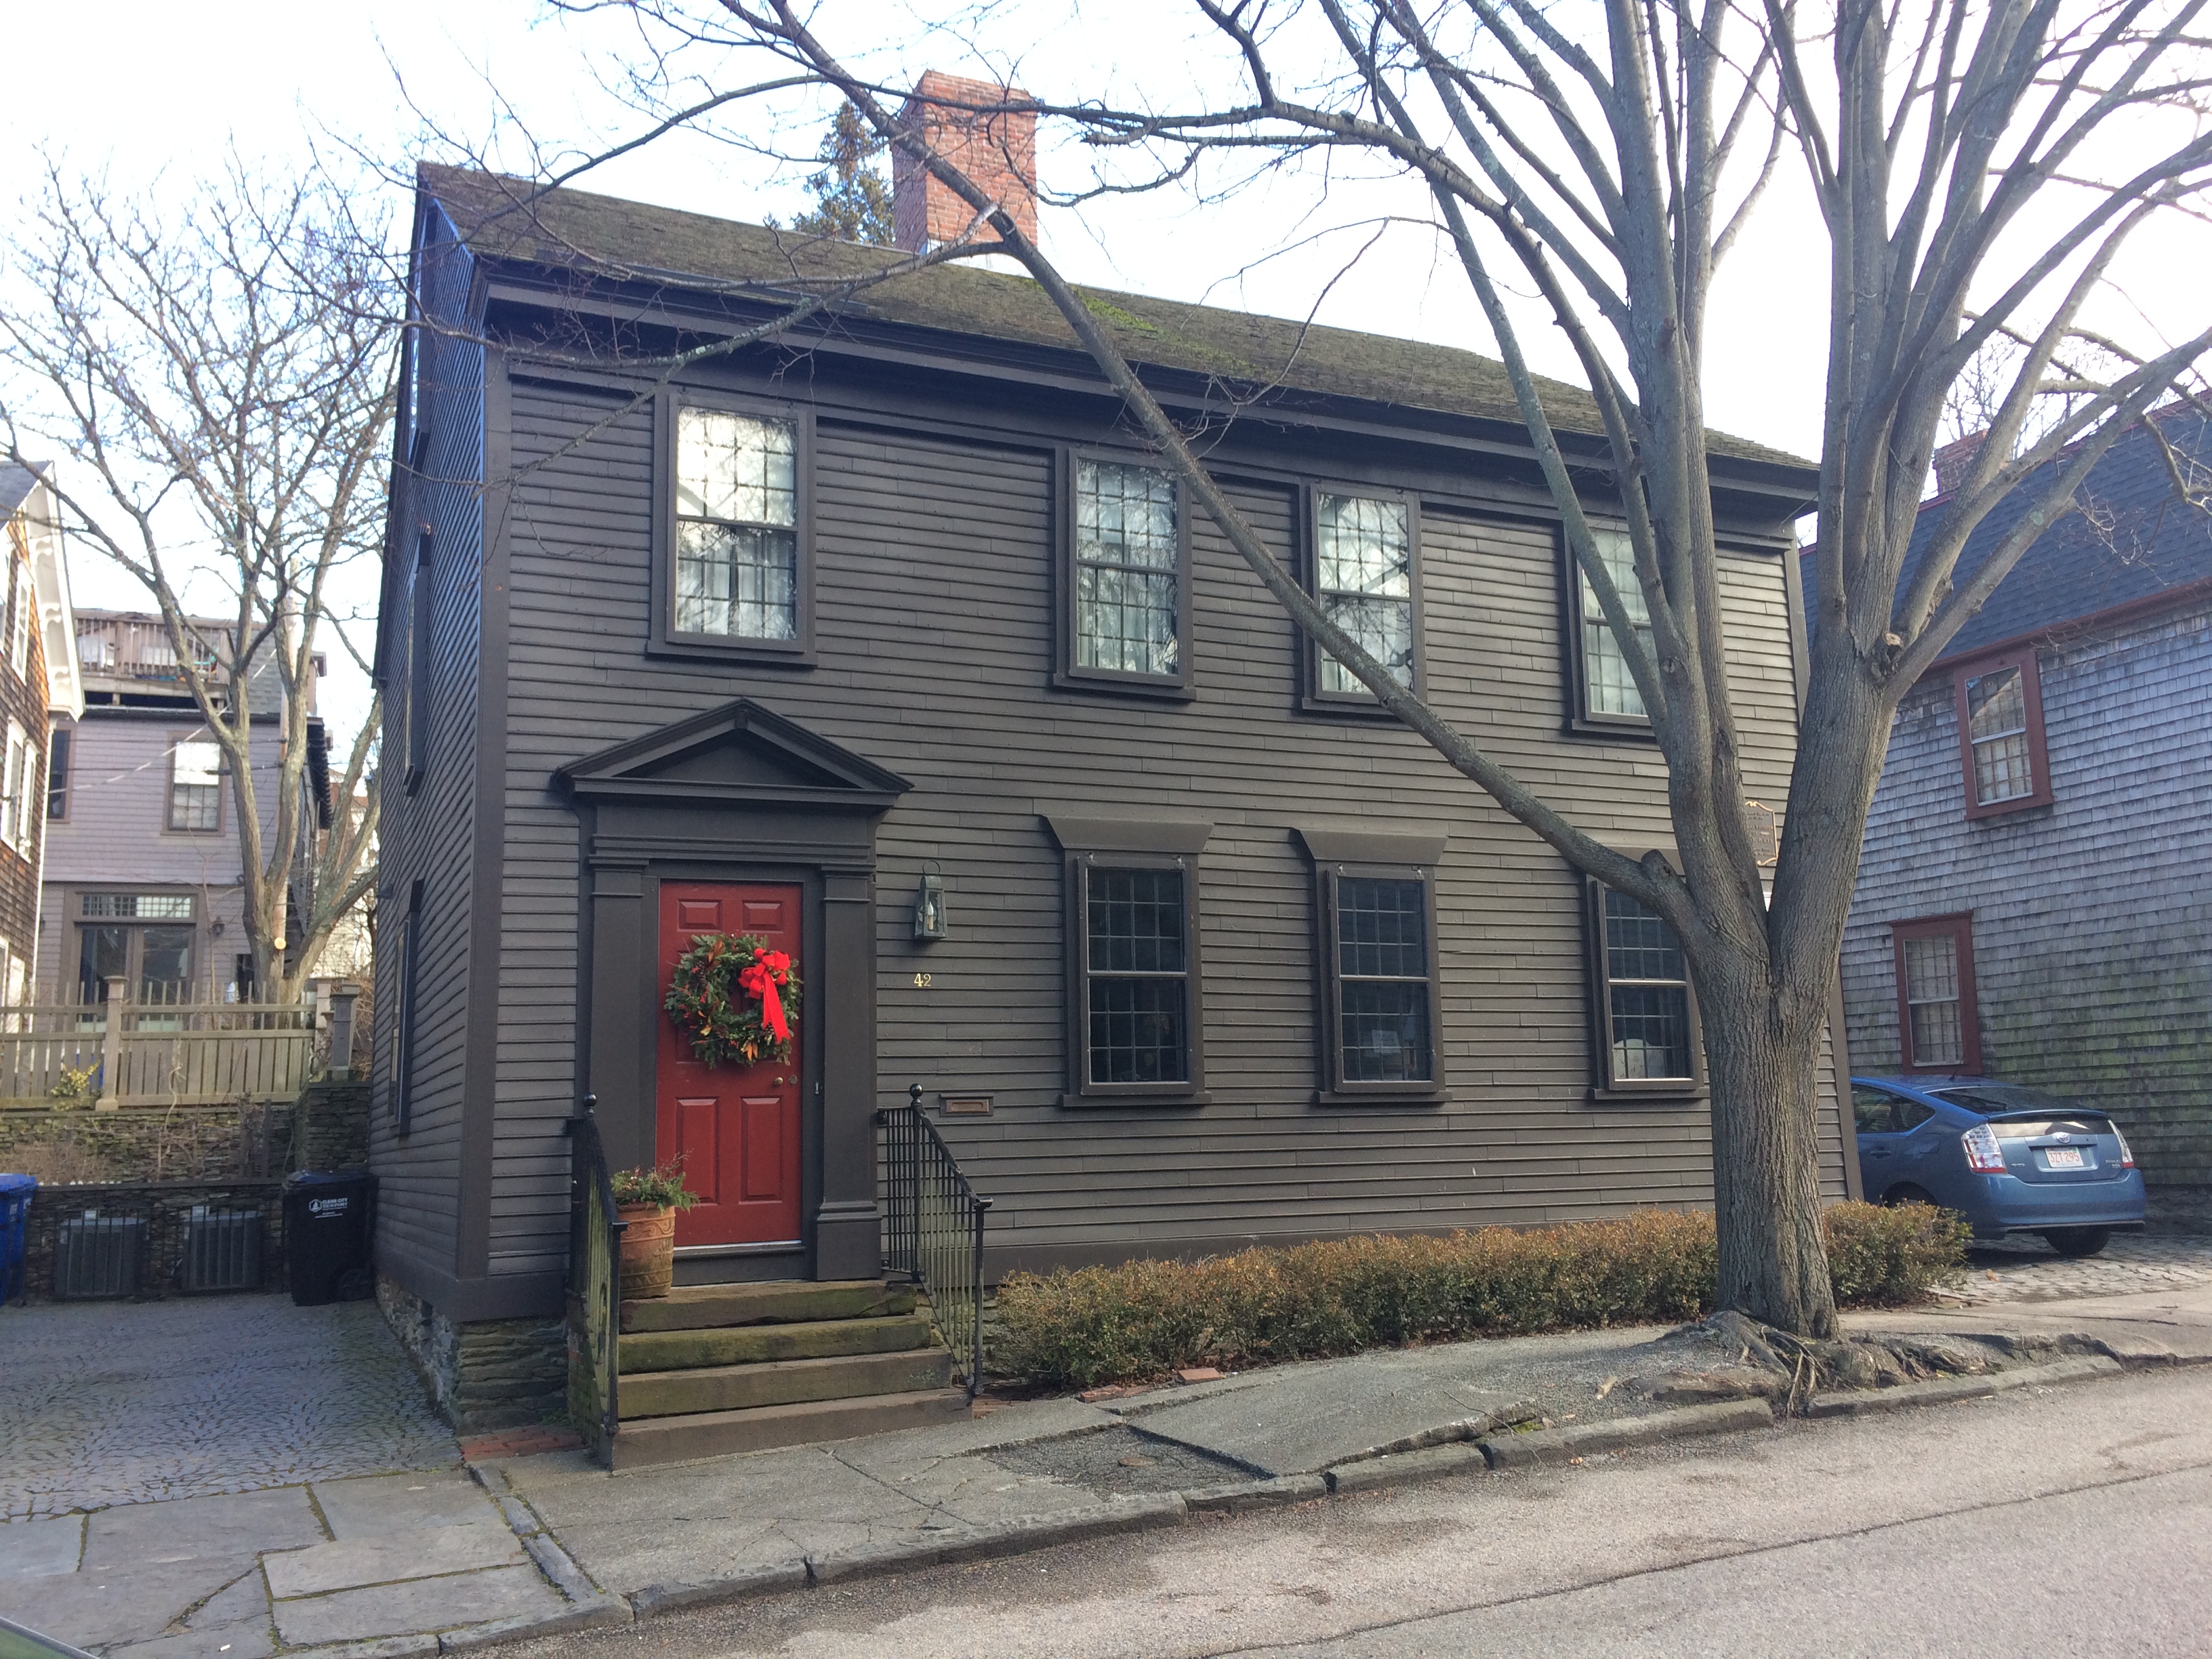 The Berry House at 42 Division St. in Newport.